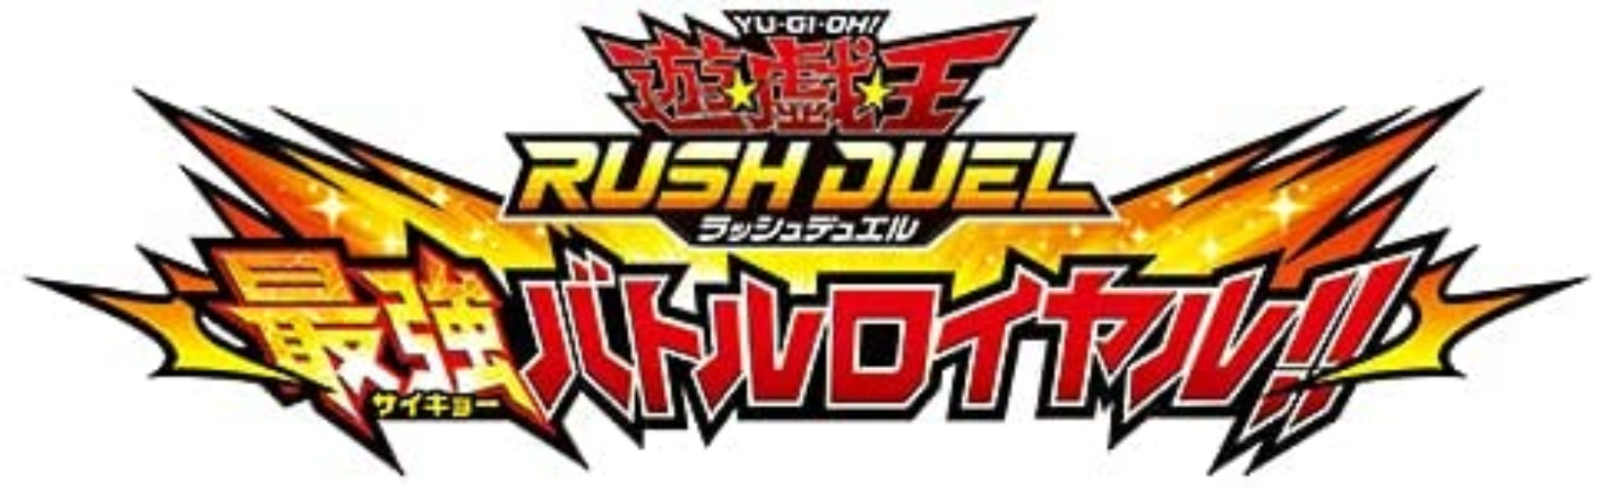 Nintendo Switch Yu-Gi-Oh! Rush Duel Strongest Battle Royale with 3Cards JAPAN